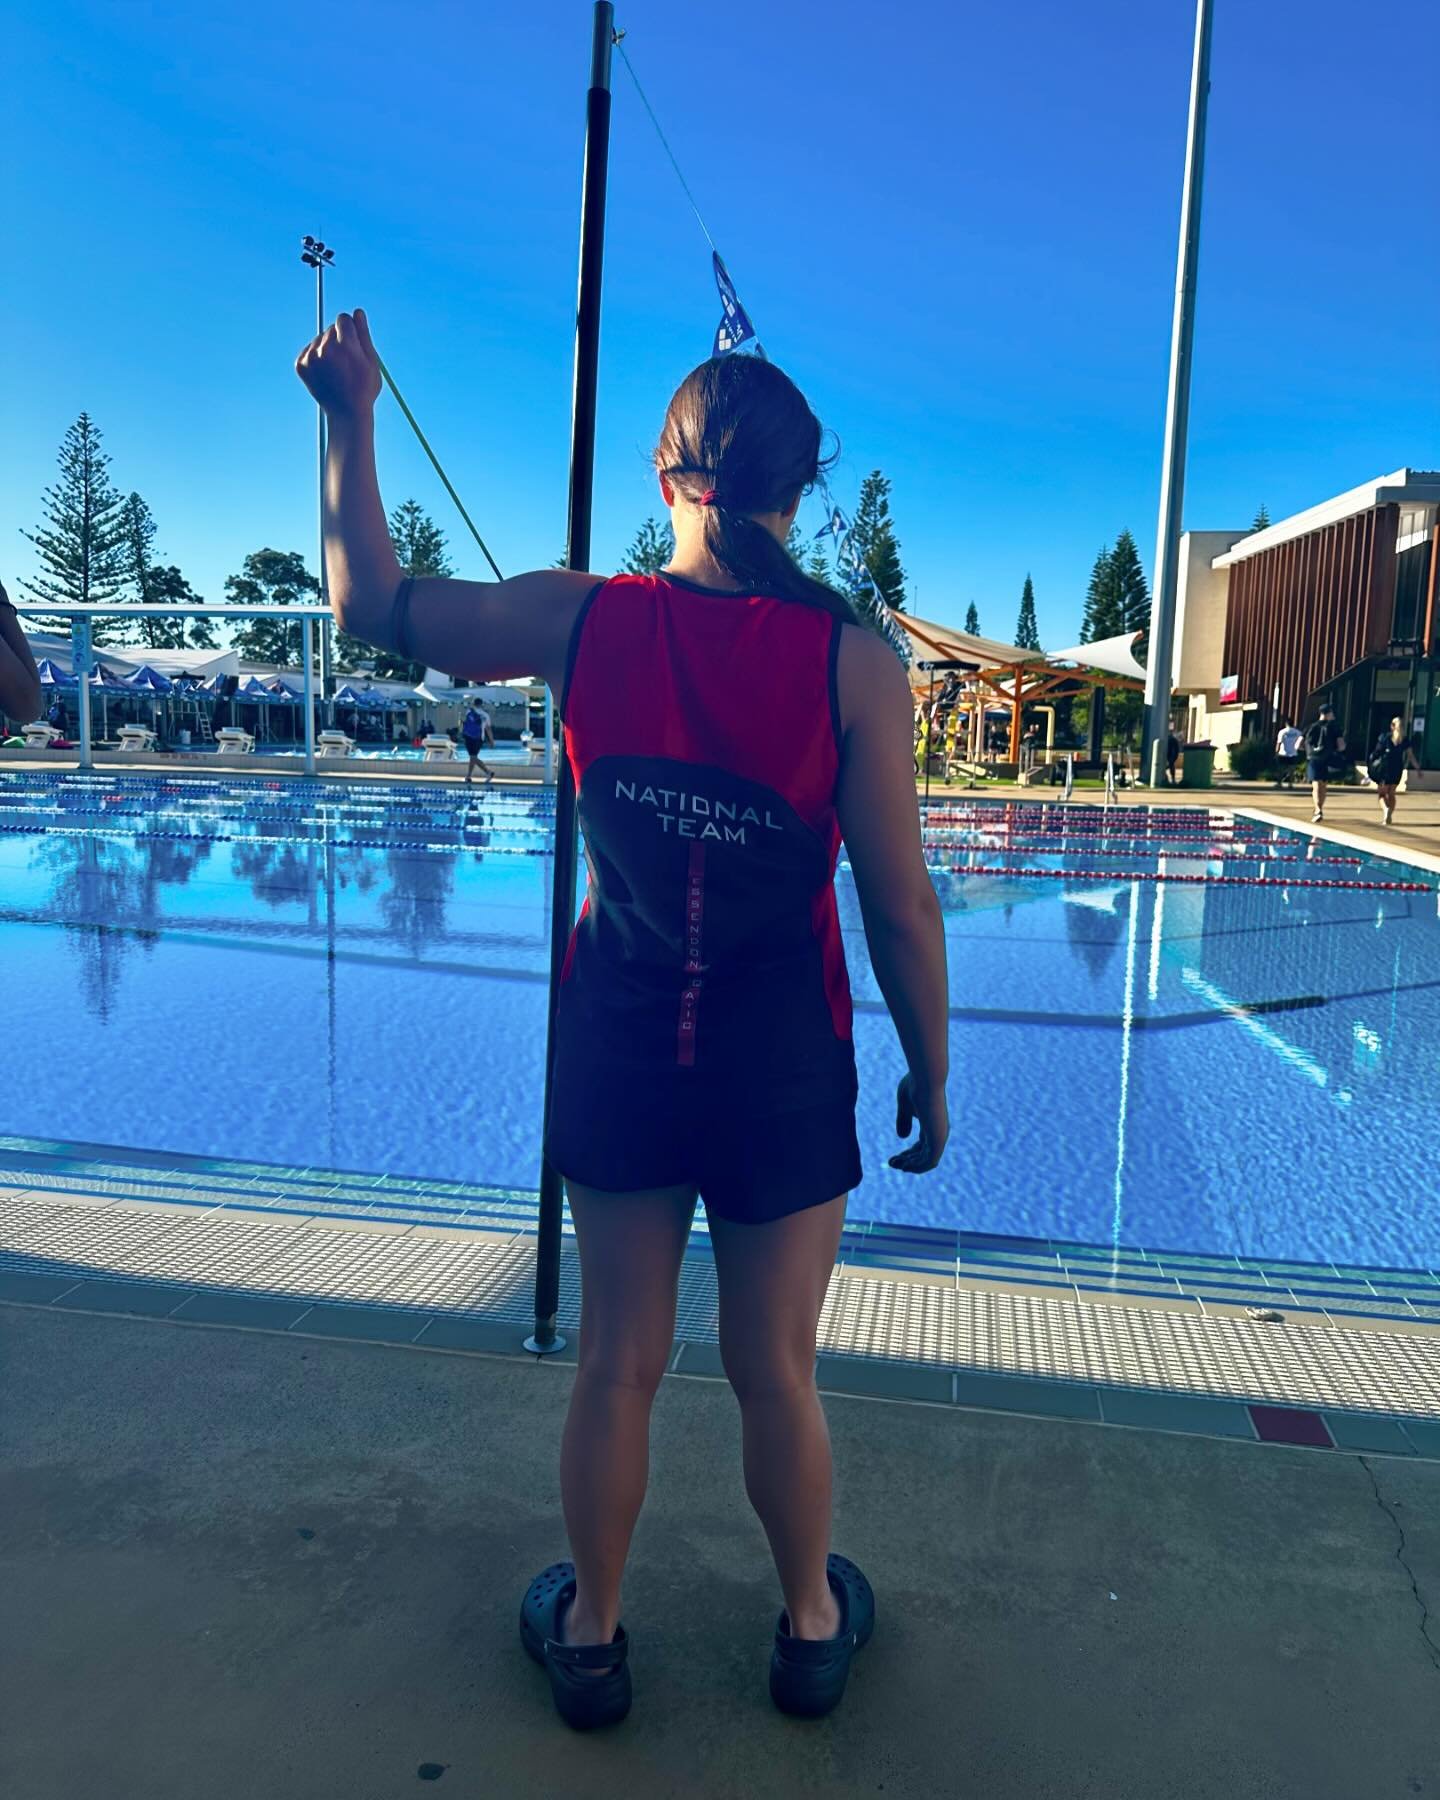 Australian Age Championships
&bull;
Day 6 and we had Megan, Ruolan, Alan and Mia in action. Megan &amp; Ruolan in the 50m butterfly, Alan in the 50m freestyle and Mia in the 400m freestyle. Some solid performances this morning, the highlight being Mi